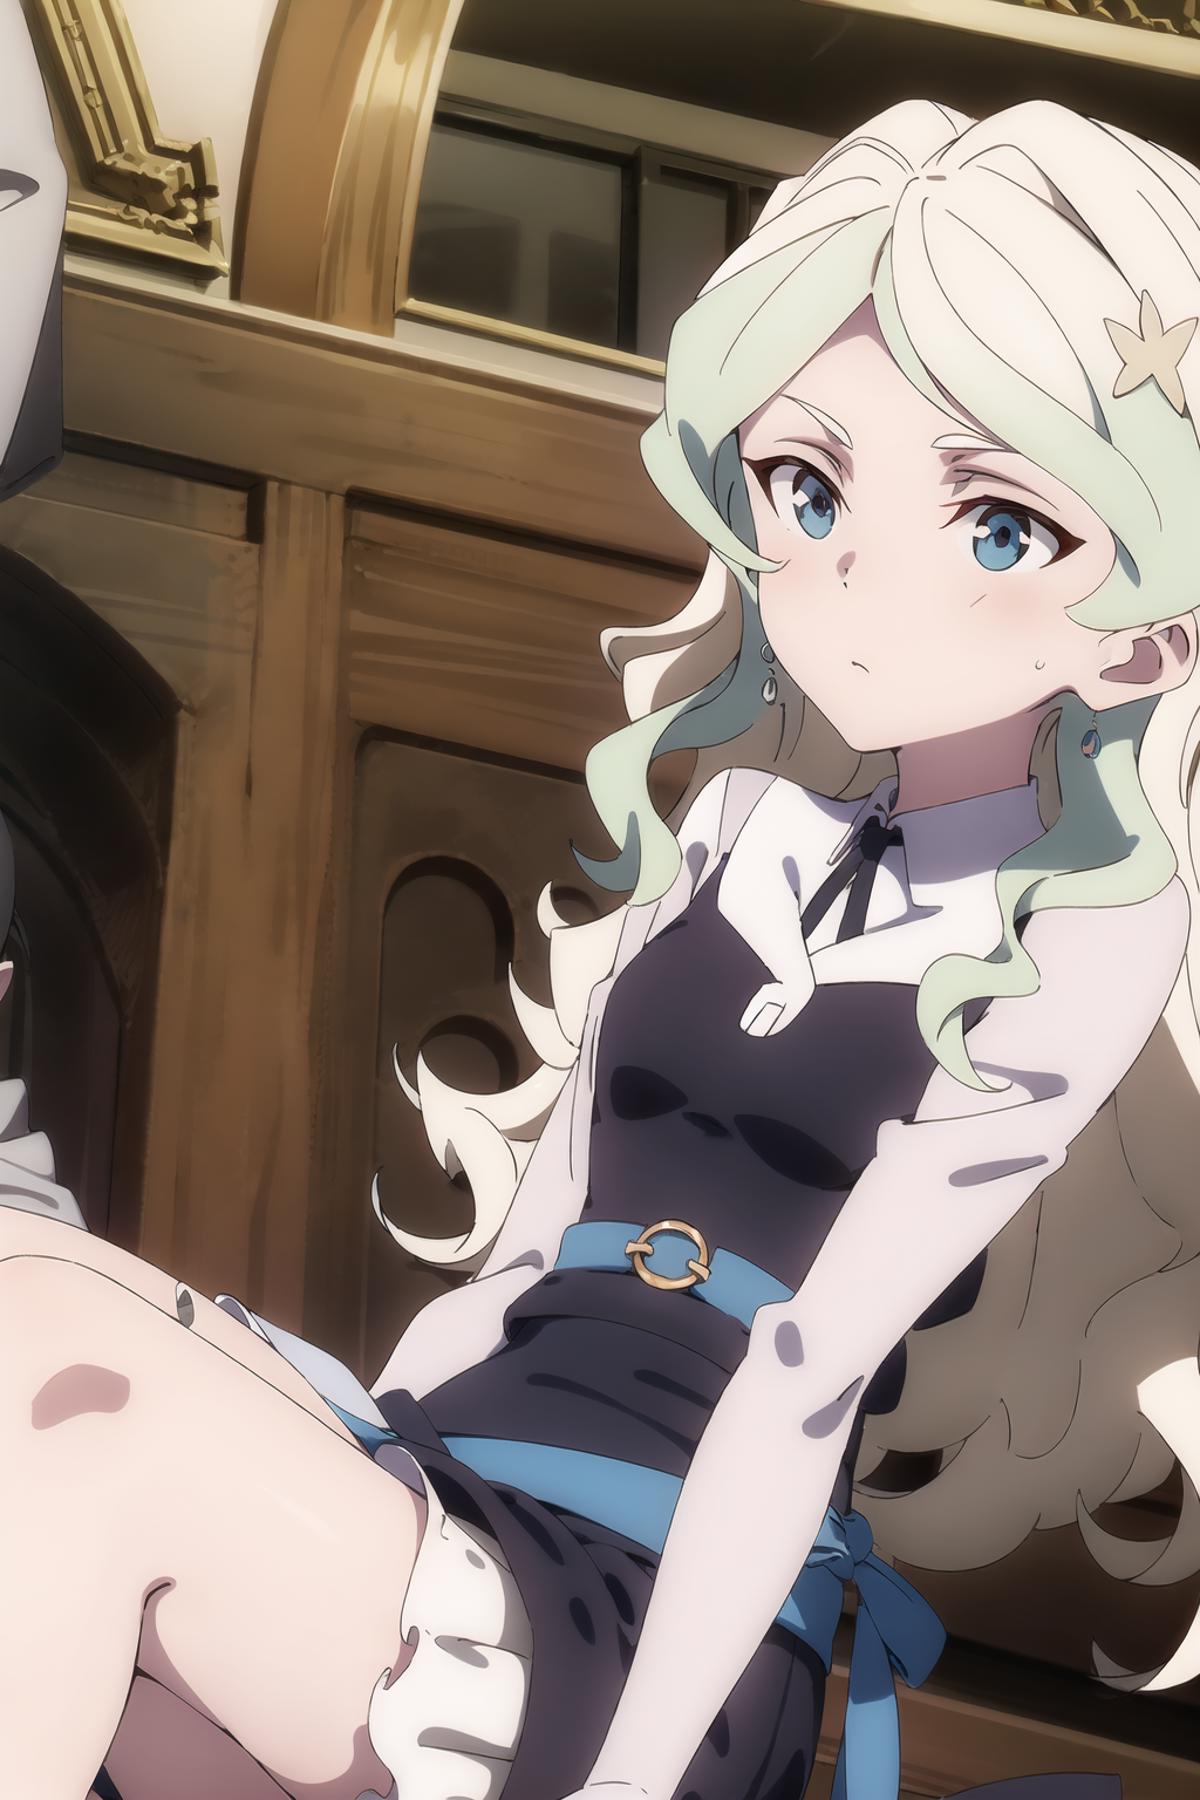 Diana Cavendish (Little Witch Academia) image by BDZ888